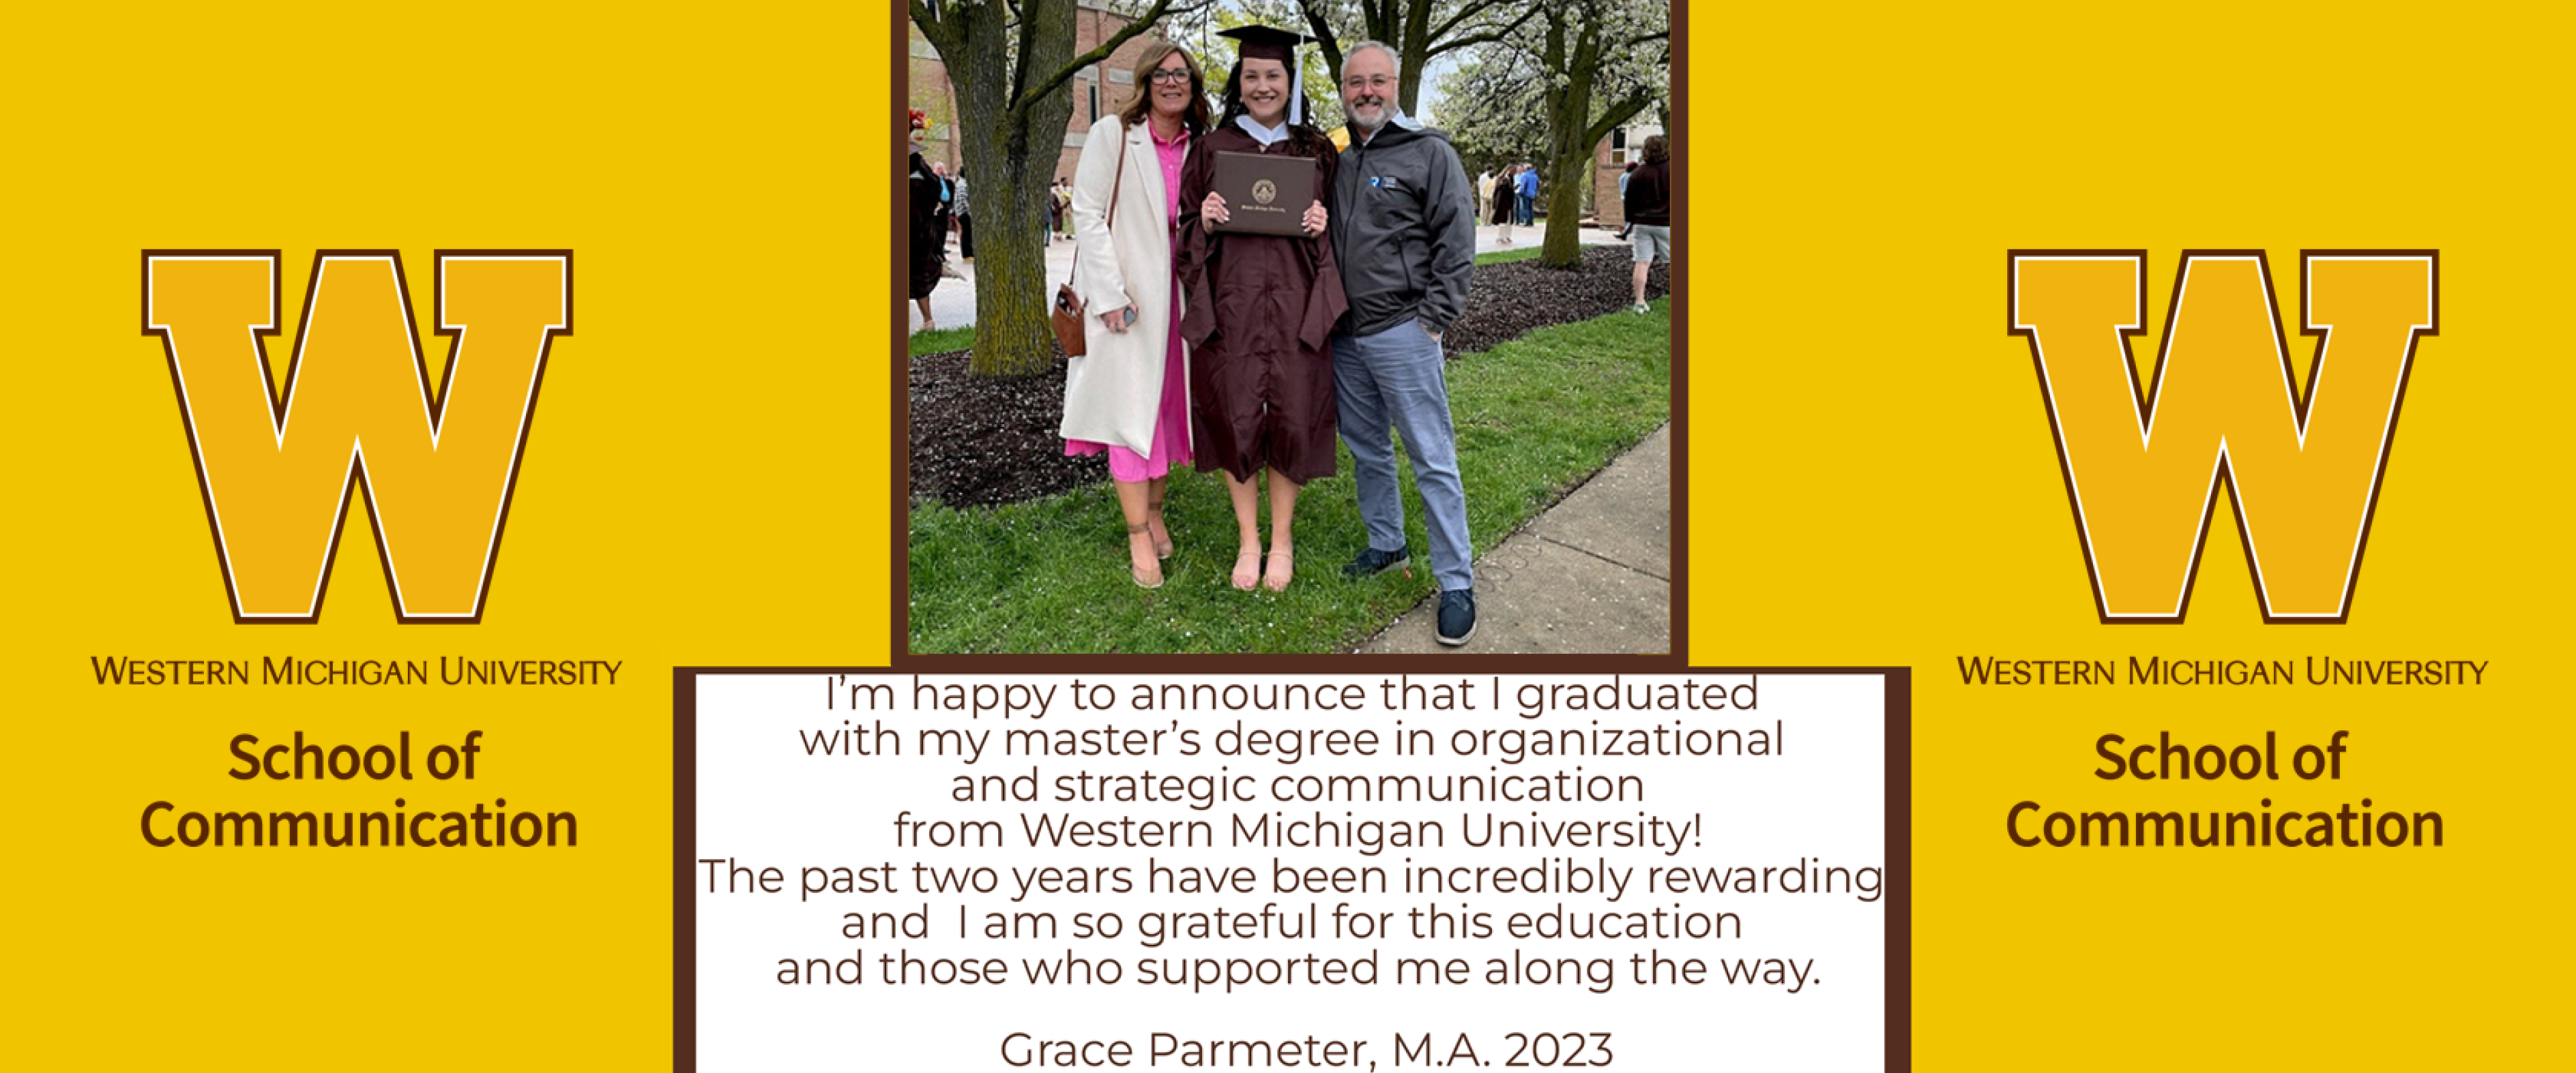 I'm happy to announce that I graduated with my master's degree in organizational and strategic communication from Western Michigan University! The past two years have been incredibly rewarding and I am so grateful for this education and those who supported me along the way. Grace Parmeter, M.A. 2023